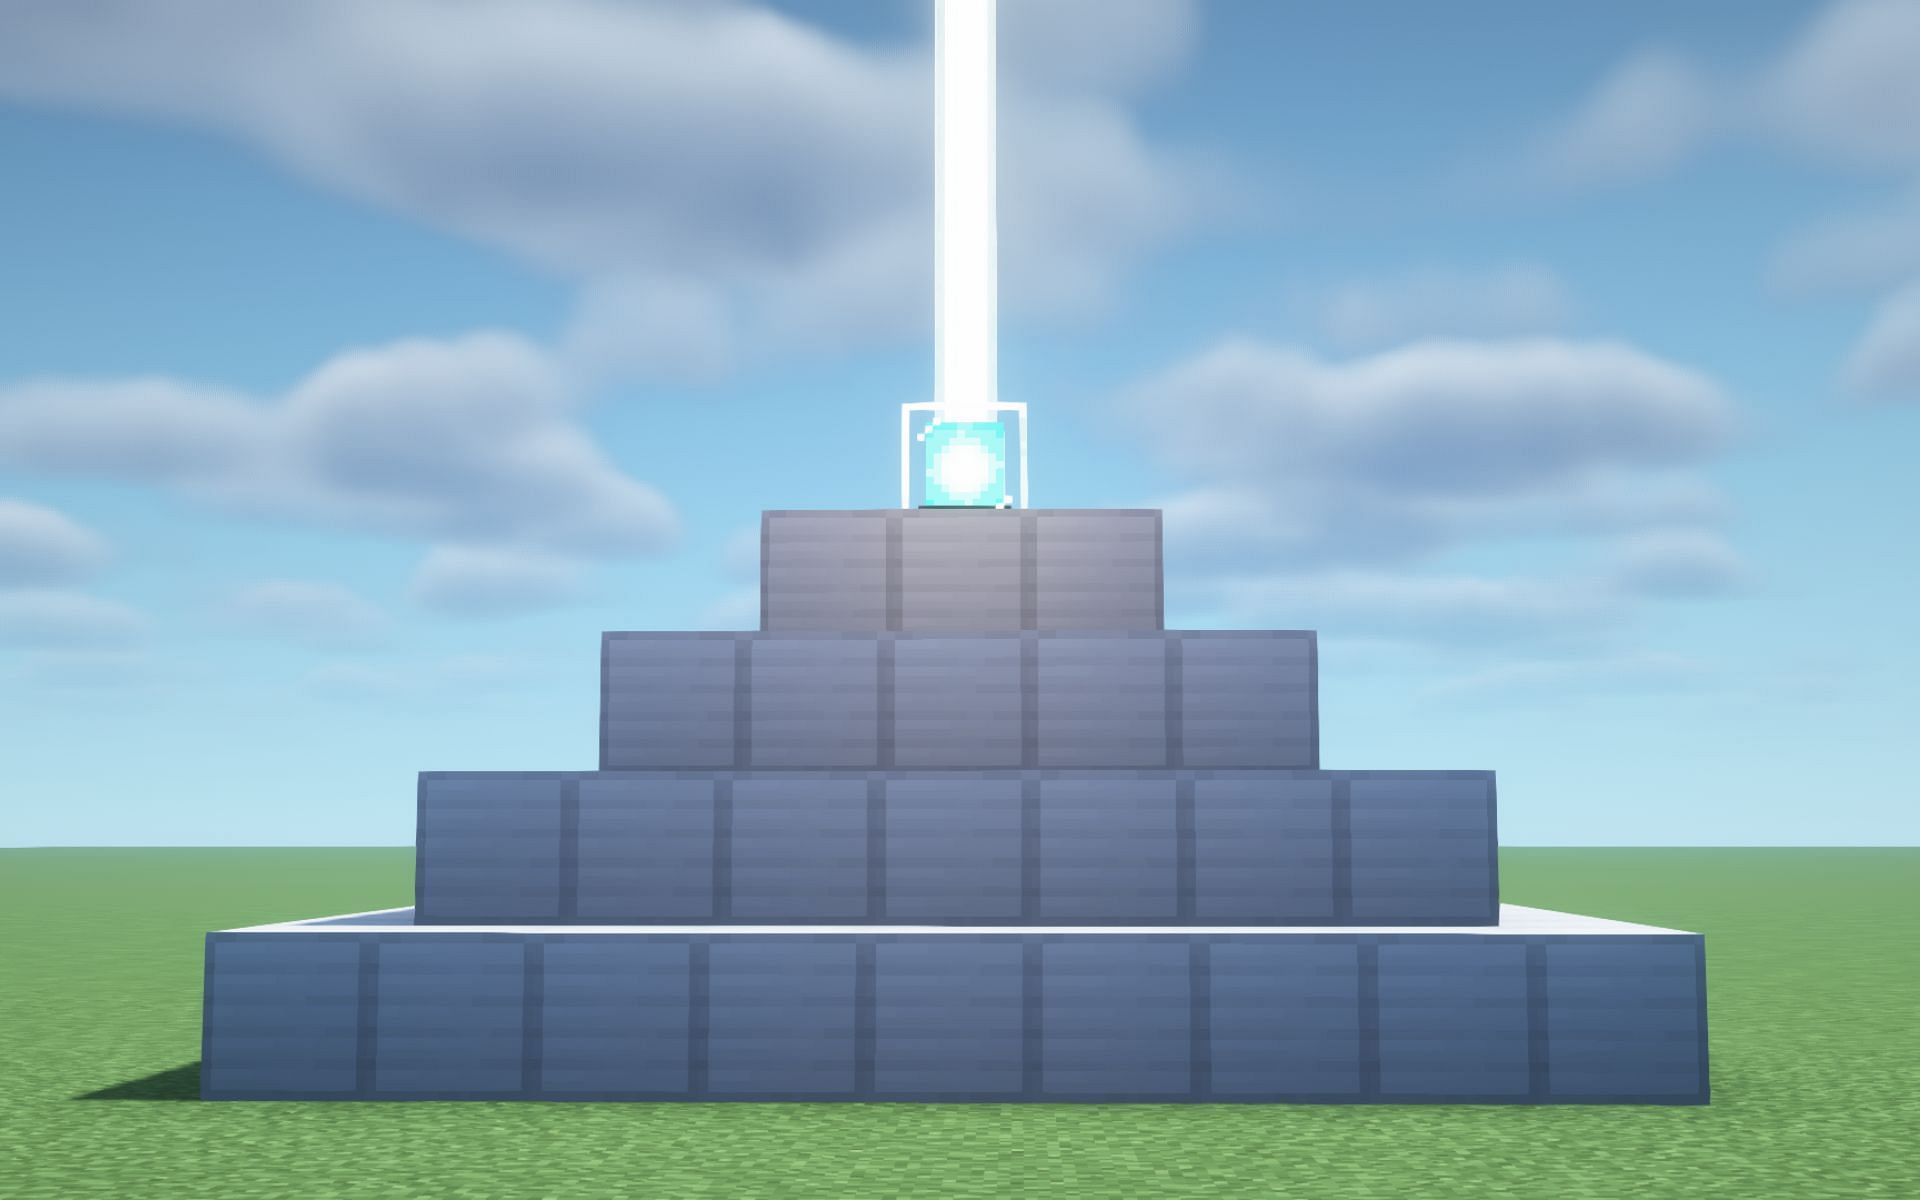 Minecraft: how to make and activate a Beacon